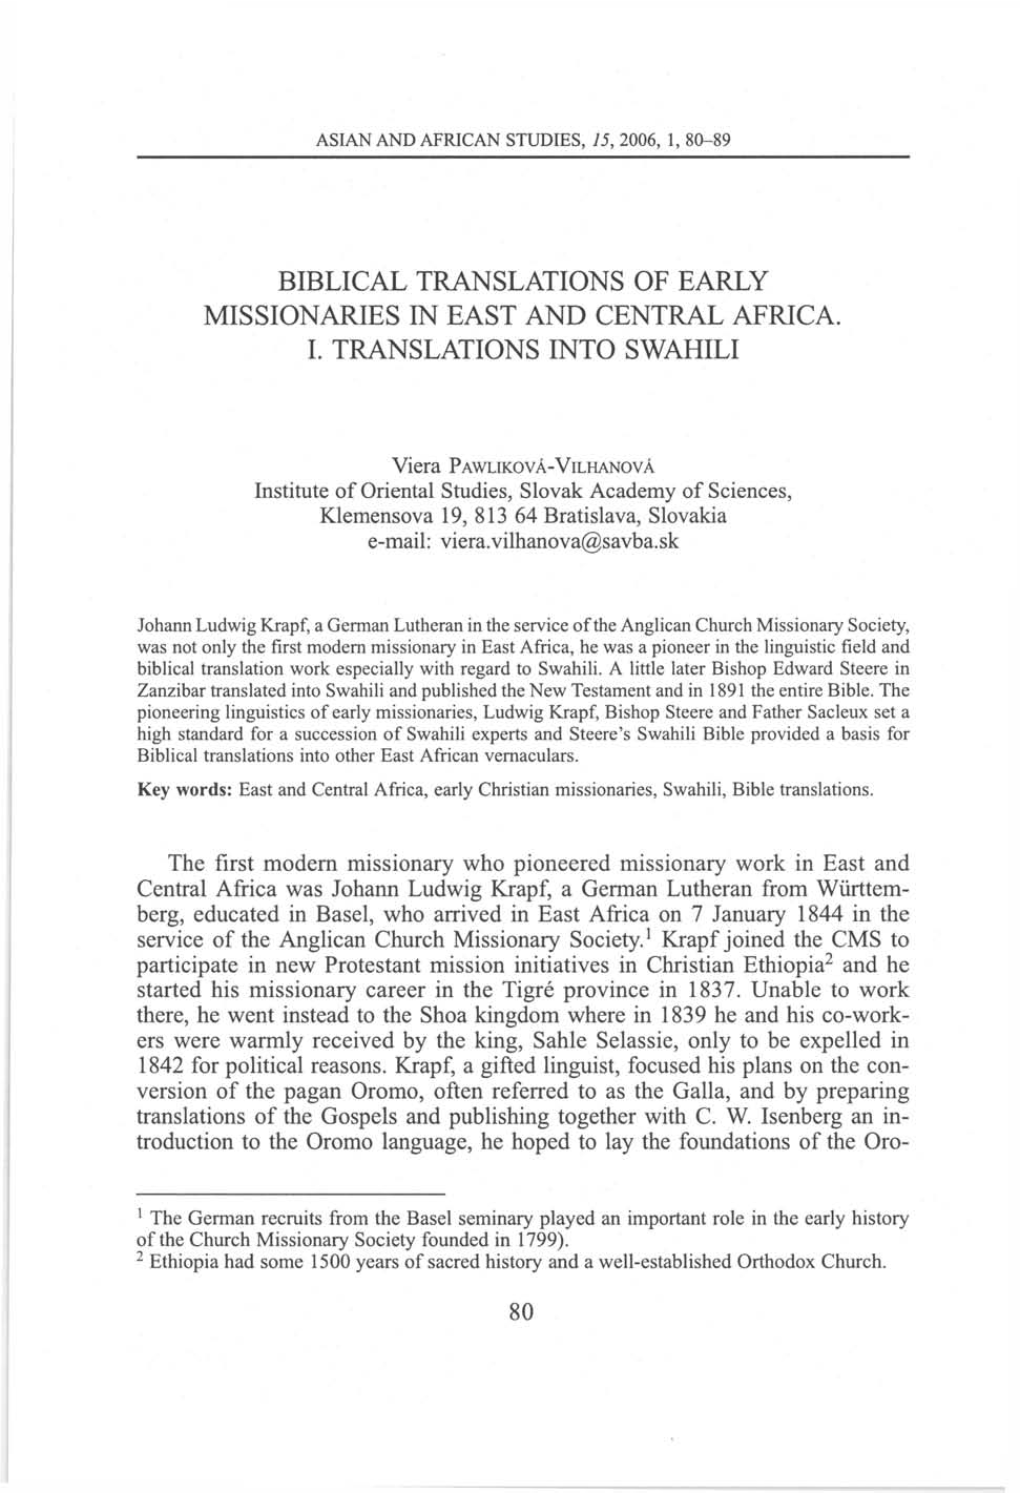 Biblical Translations of Early Missionaries in East and Central Africa. I. Translations Into Swahili